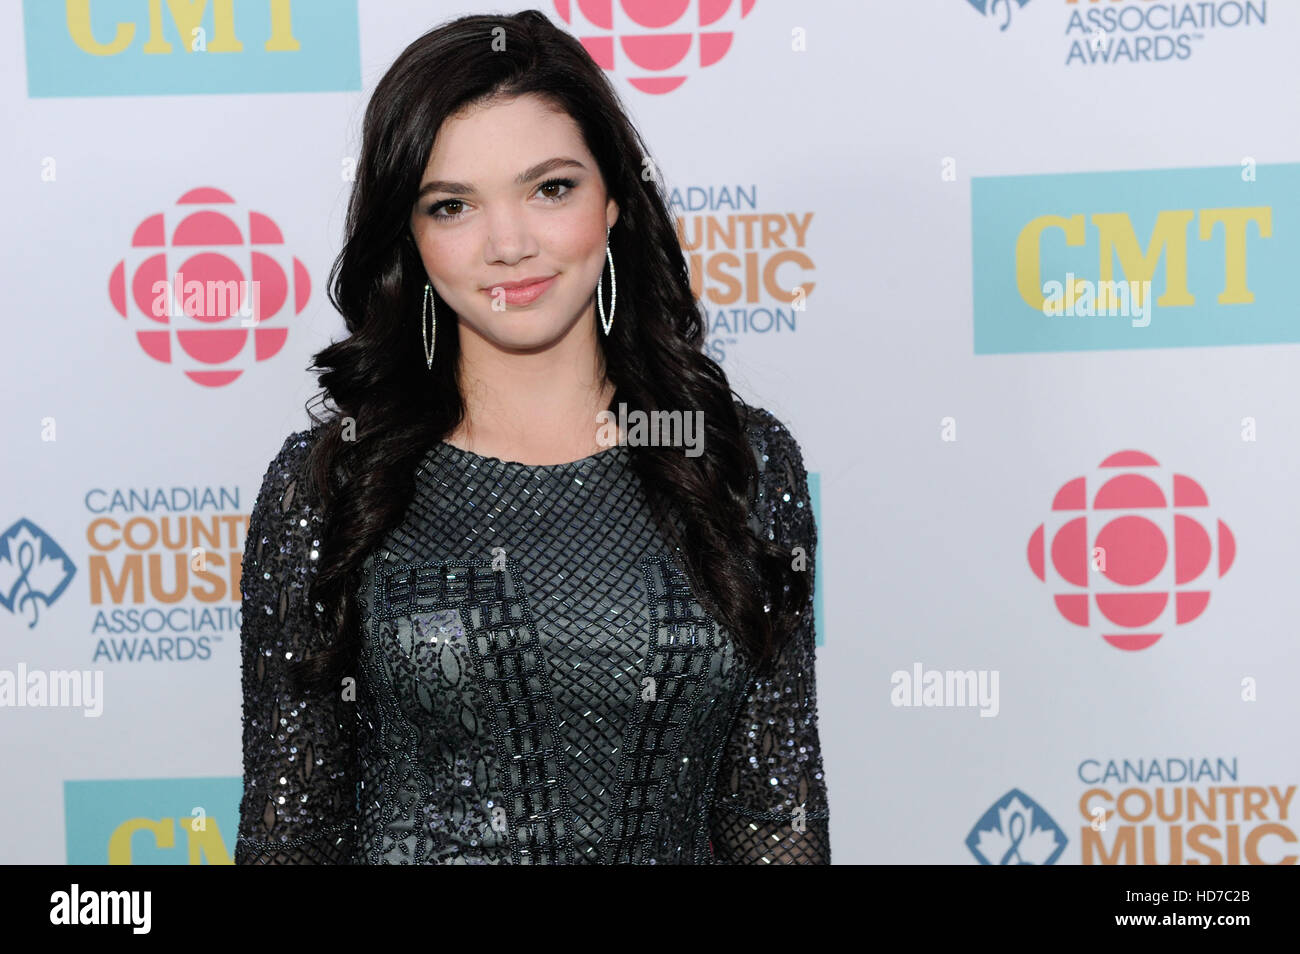 2016 Canadian Country Music Association Awards Show at the Budweiser Gardens - Press Room  Featuring: Alisha Newton Where: London, Canada When: 11 Sep 2016 Stock Photo